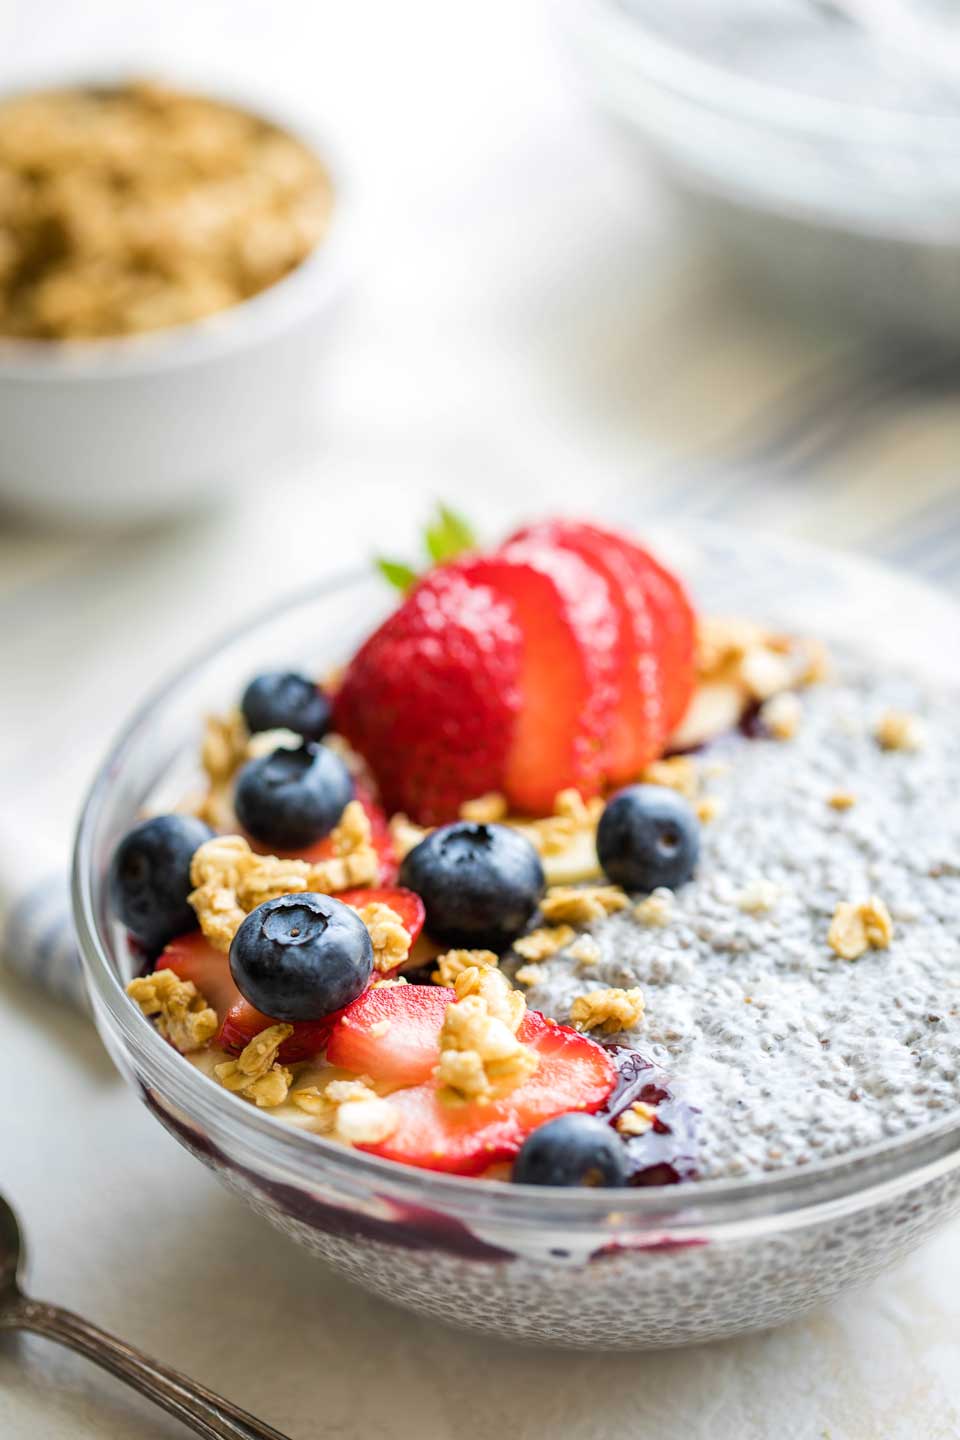 Chia Pudding with Coconut Milk and Berries - Two Healthy Kit